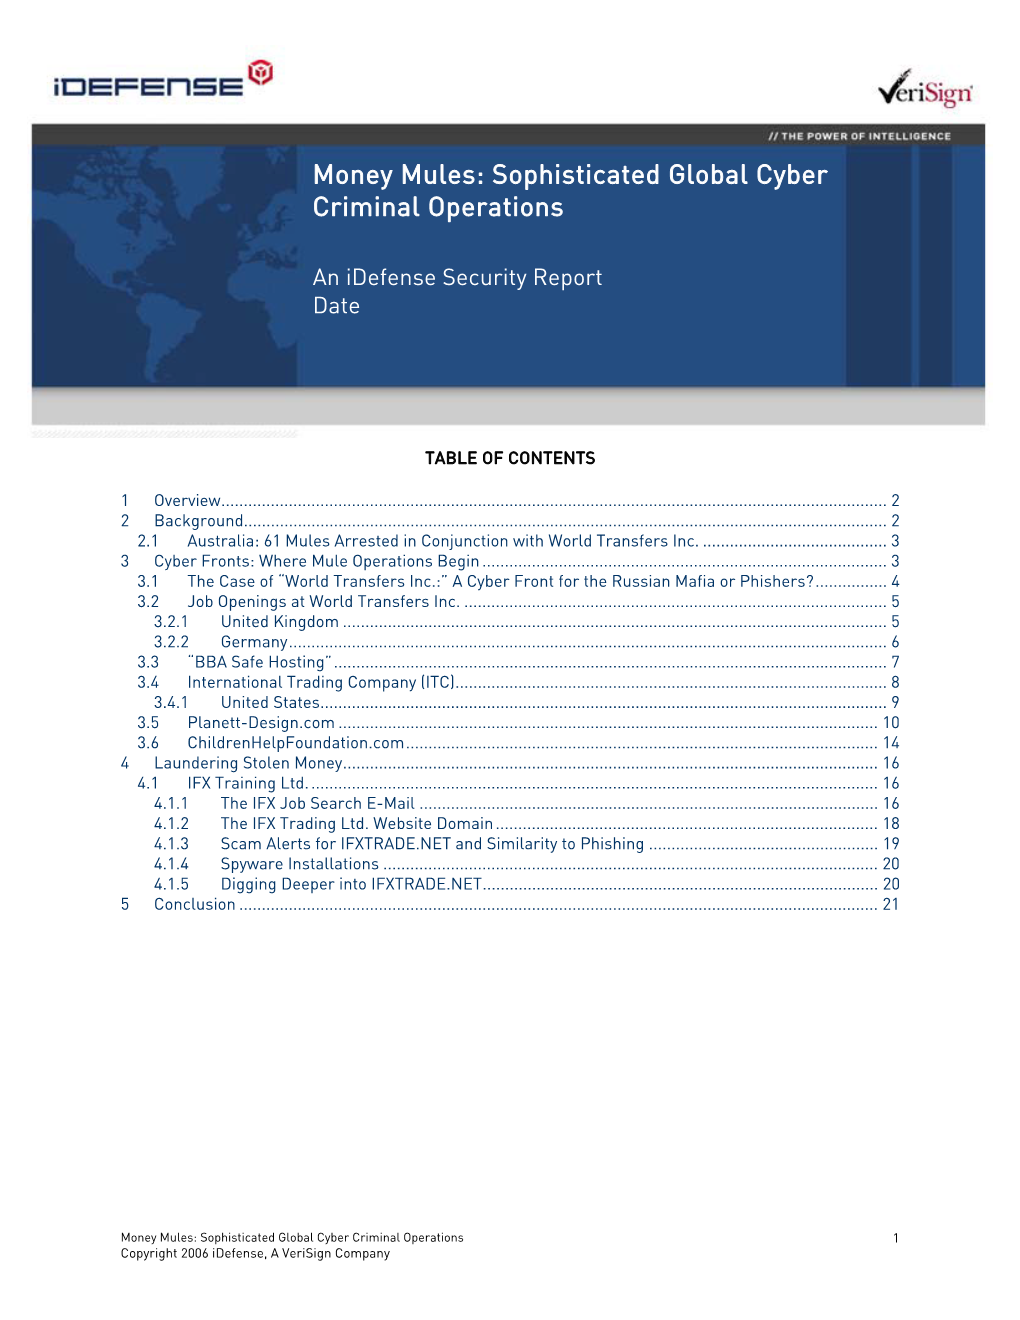 Money Mules: Sophisticated Global Cyber